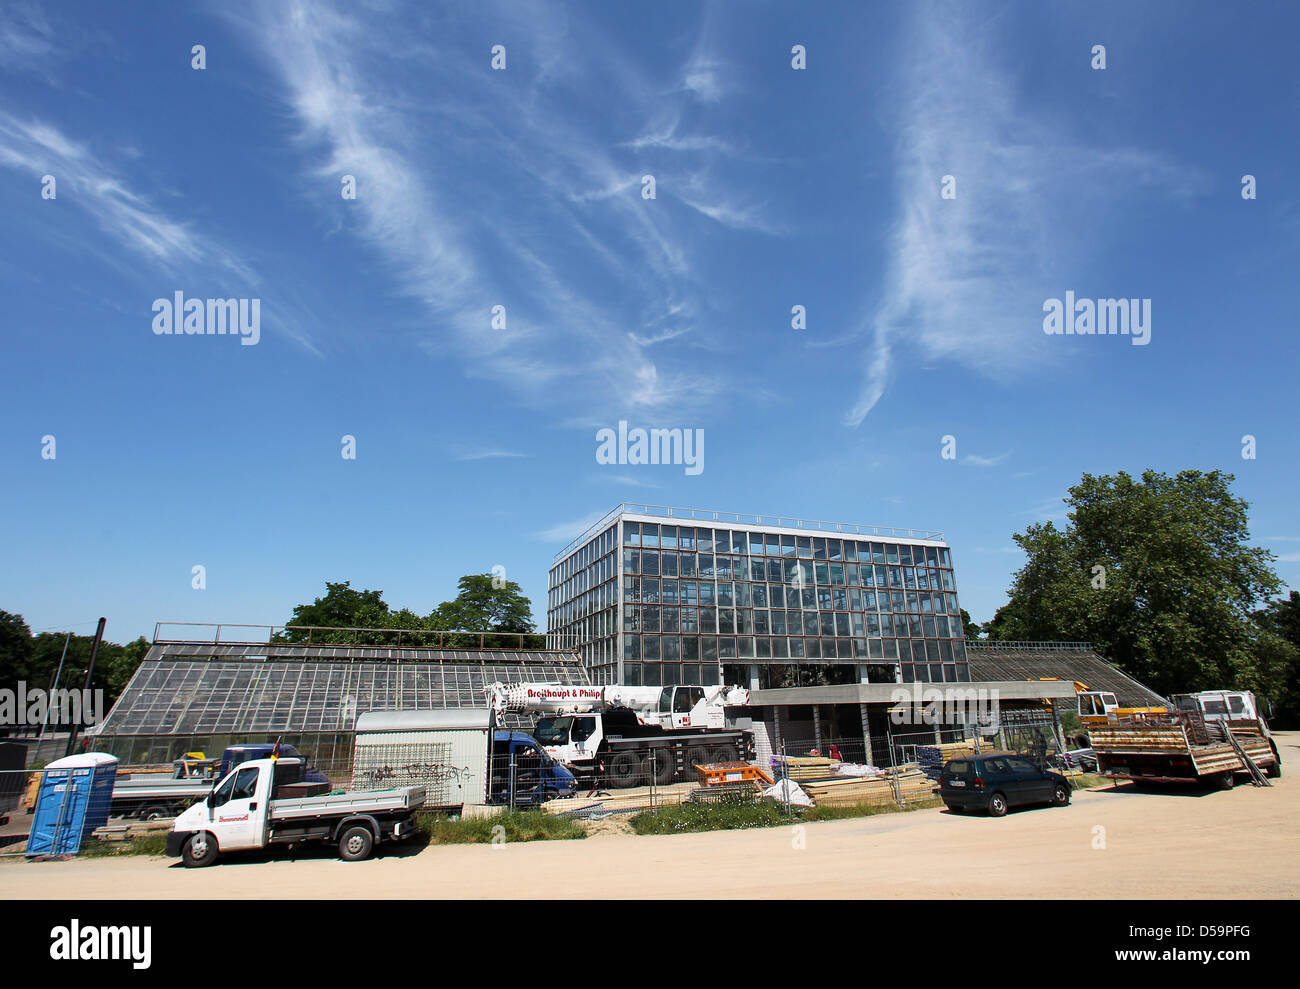 The tropical facilities of the Gruson greenhouses are being renovated in Magdeburg, Germany, 29 June 2010. The tradition-steeped facility will be renovated from the ground up at a cost of 2.7 million in the coming months. The plant collection is housed in ten showrooms that measure 4,000 square meters all together. The botanical facilities include 3,500 tropical and subtropical pla Stock Photo